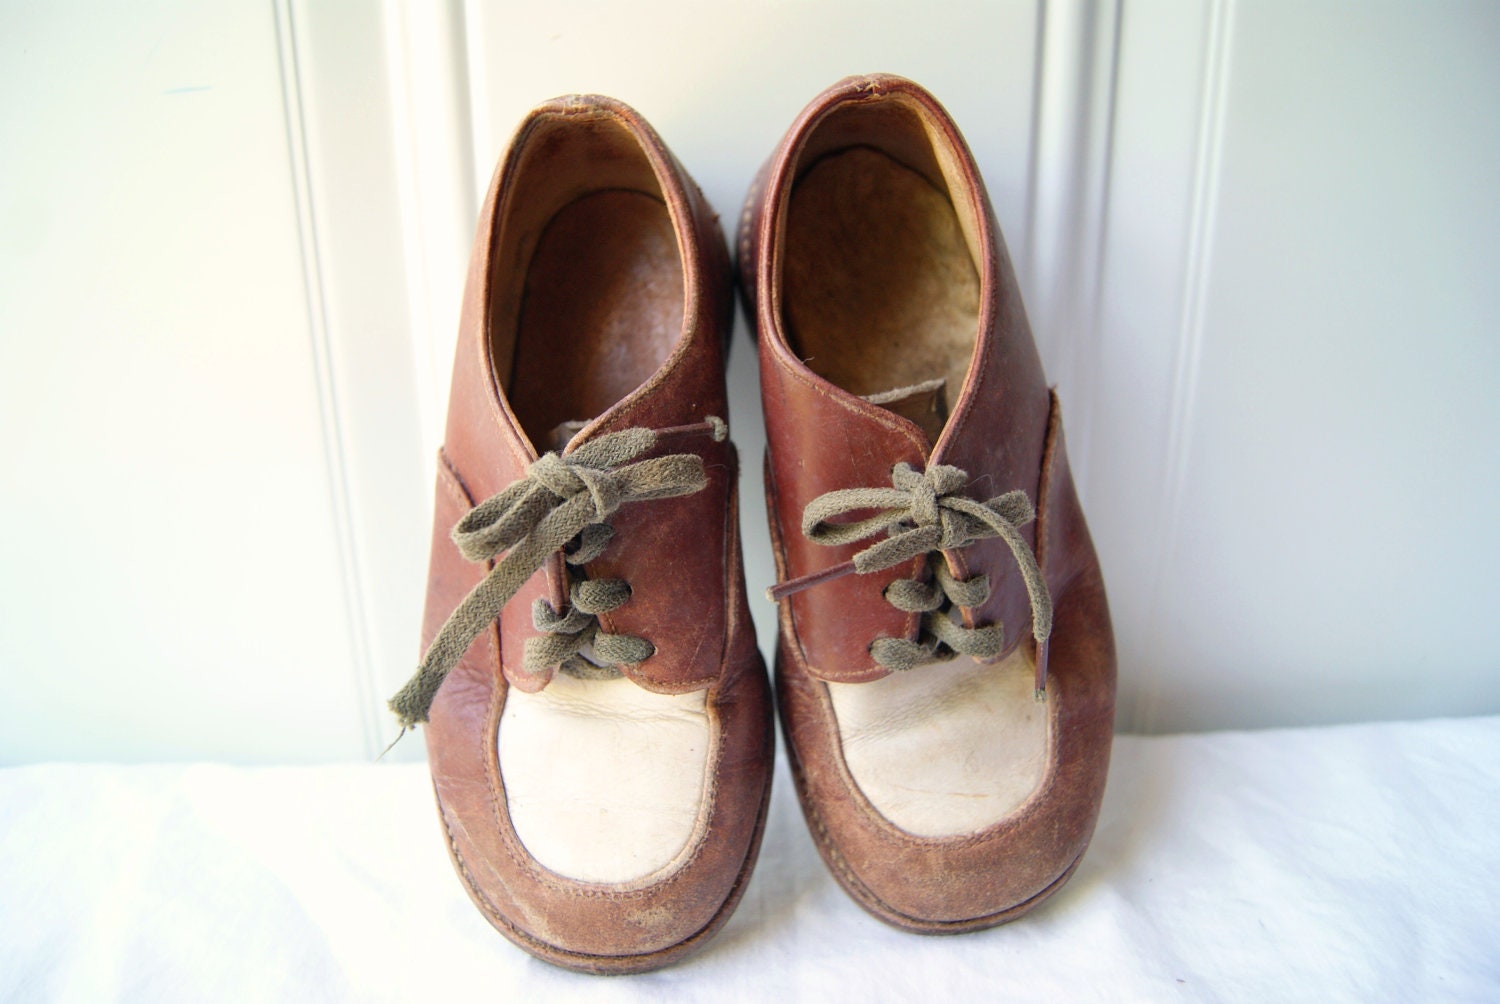 Old Vintage 1950s Brown Leather Toddler Shoes - EmeraldRooster